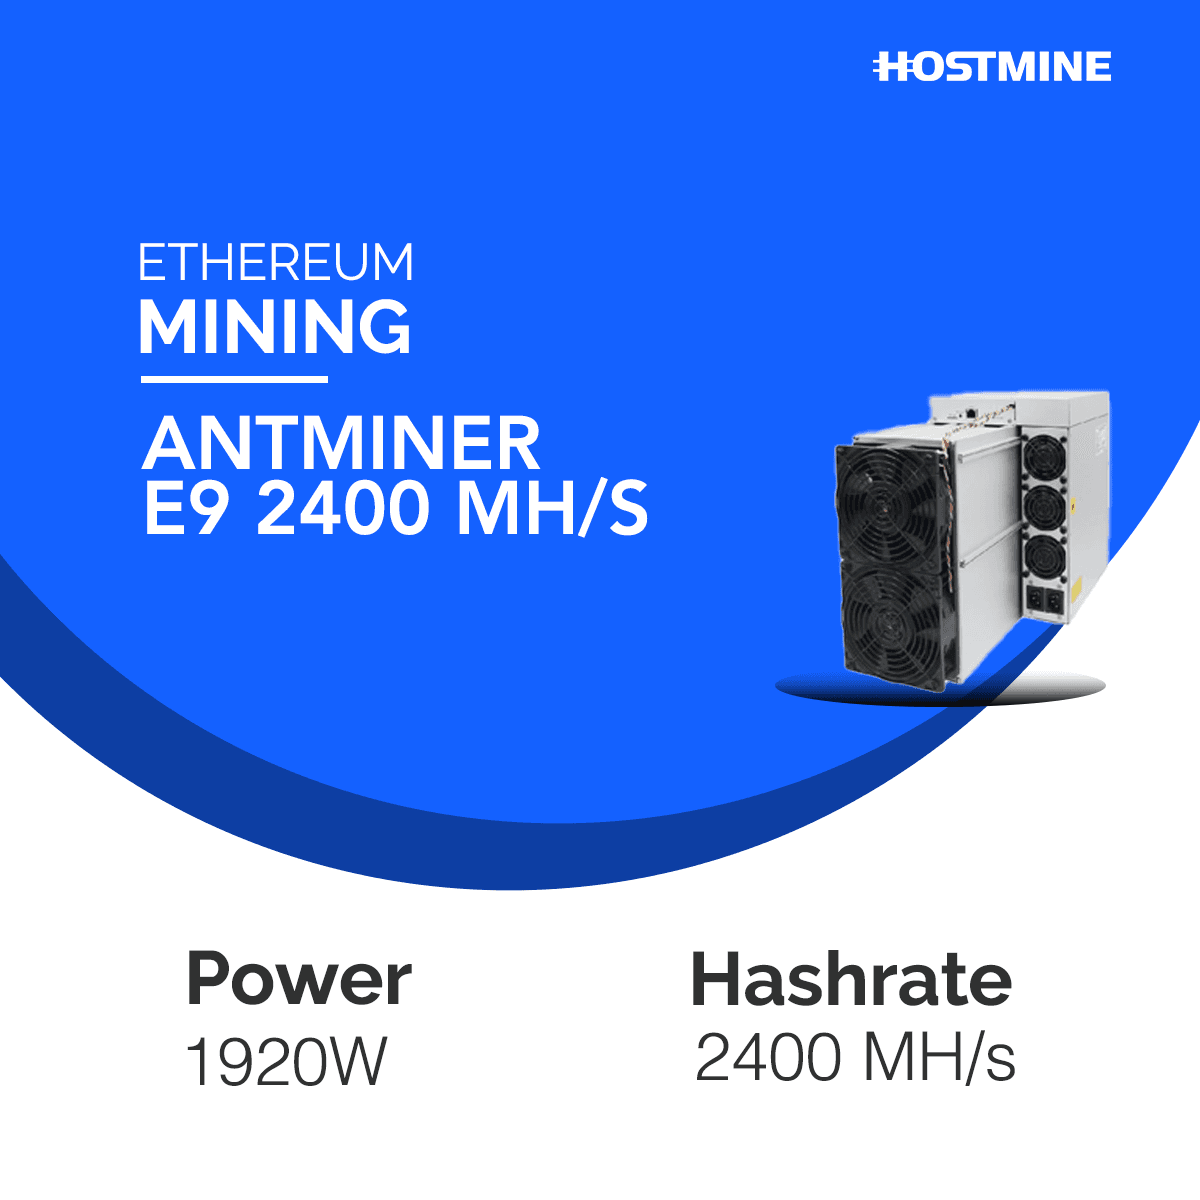 Image for ETHEREUM Mining Contract Bitmain Antminer E9 2400 MH/s | Crypto Mining Server | HOSTMINE